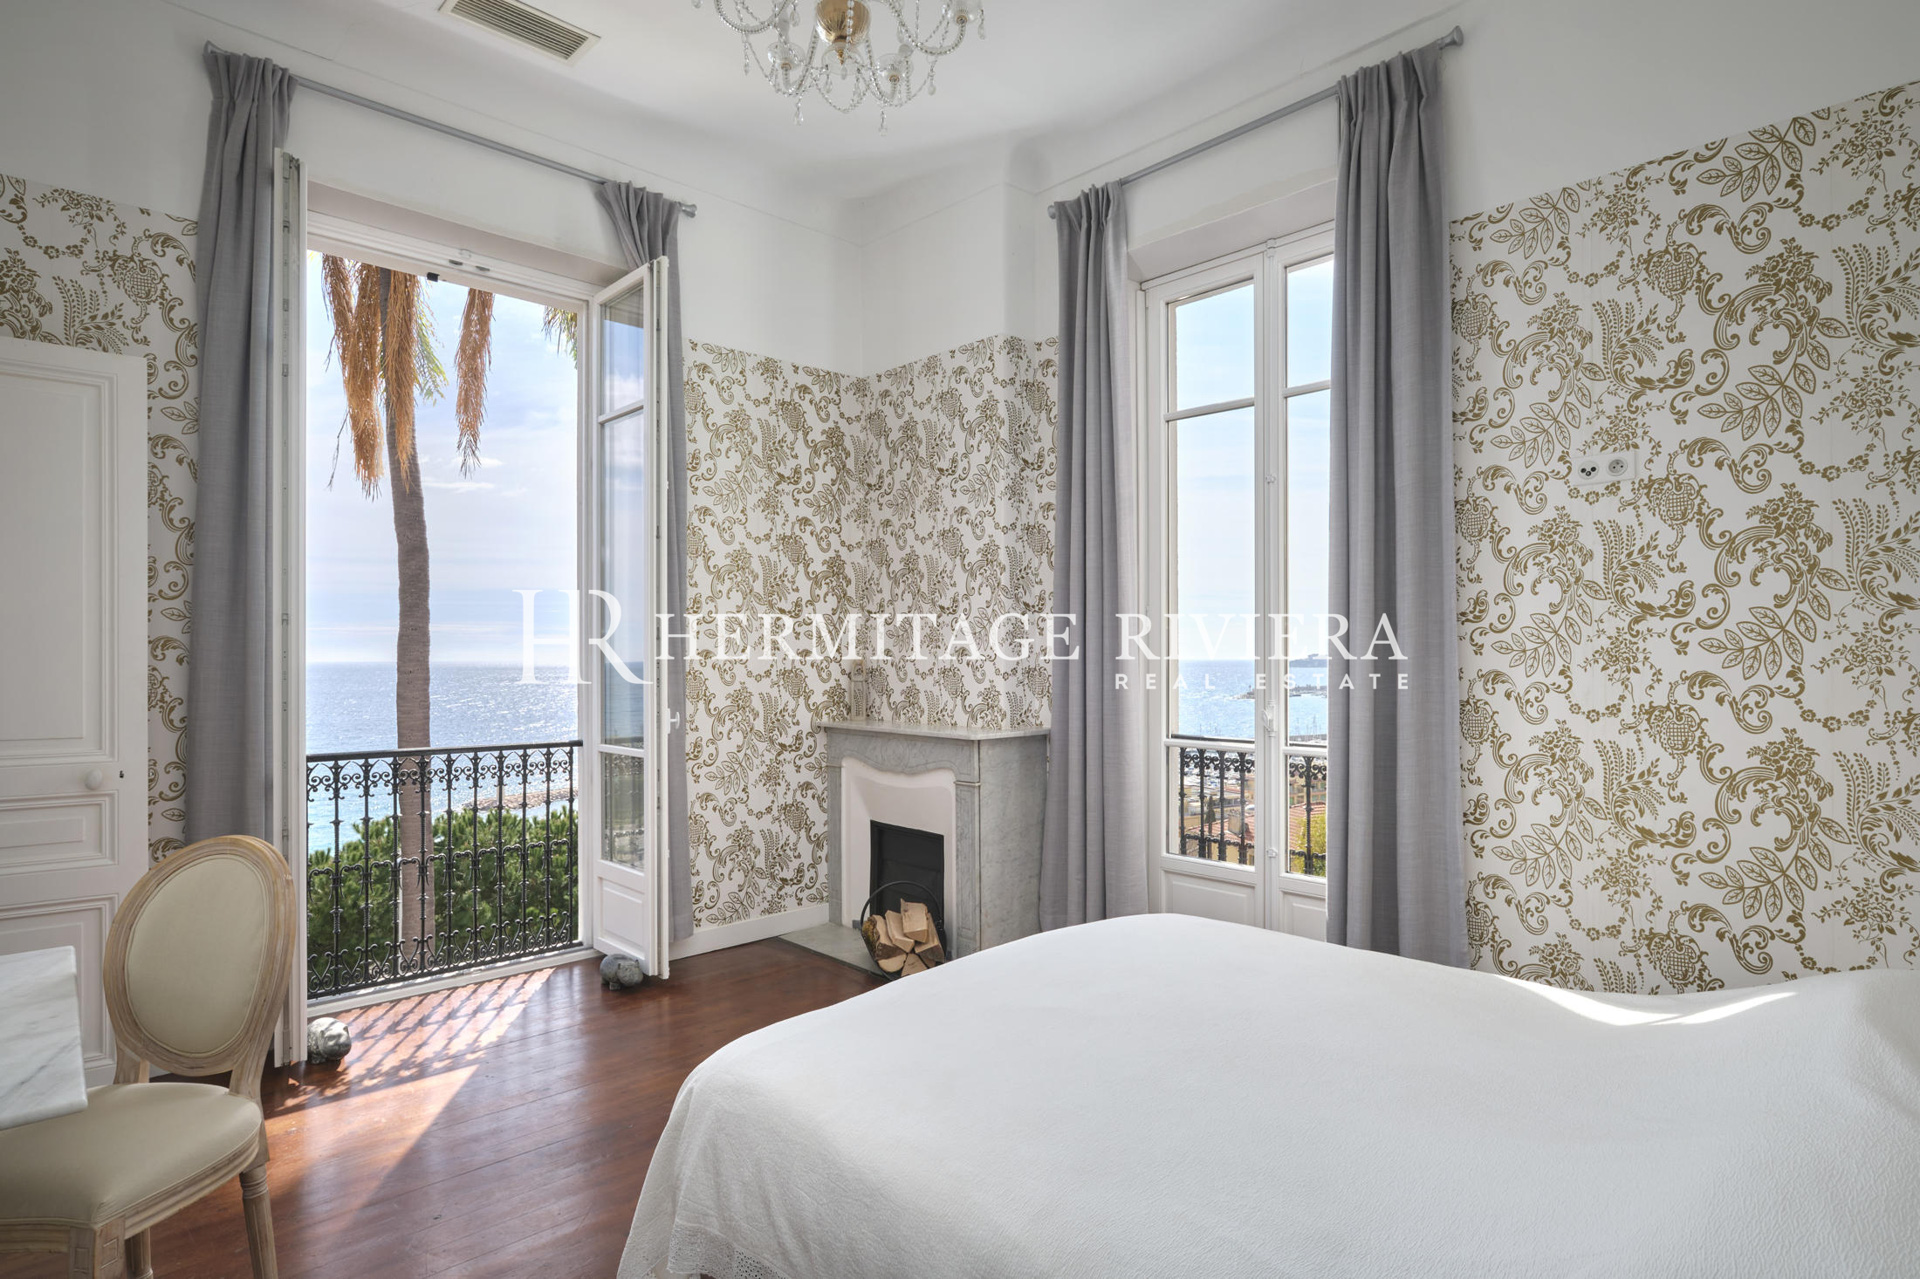 Belle Epoque villa with splendid views sea and Old town (image 15)